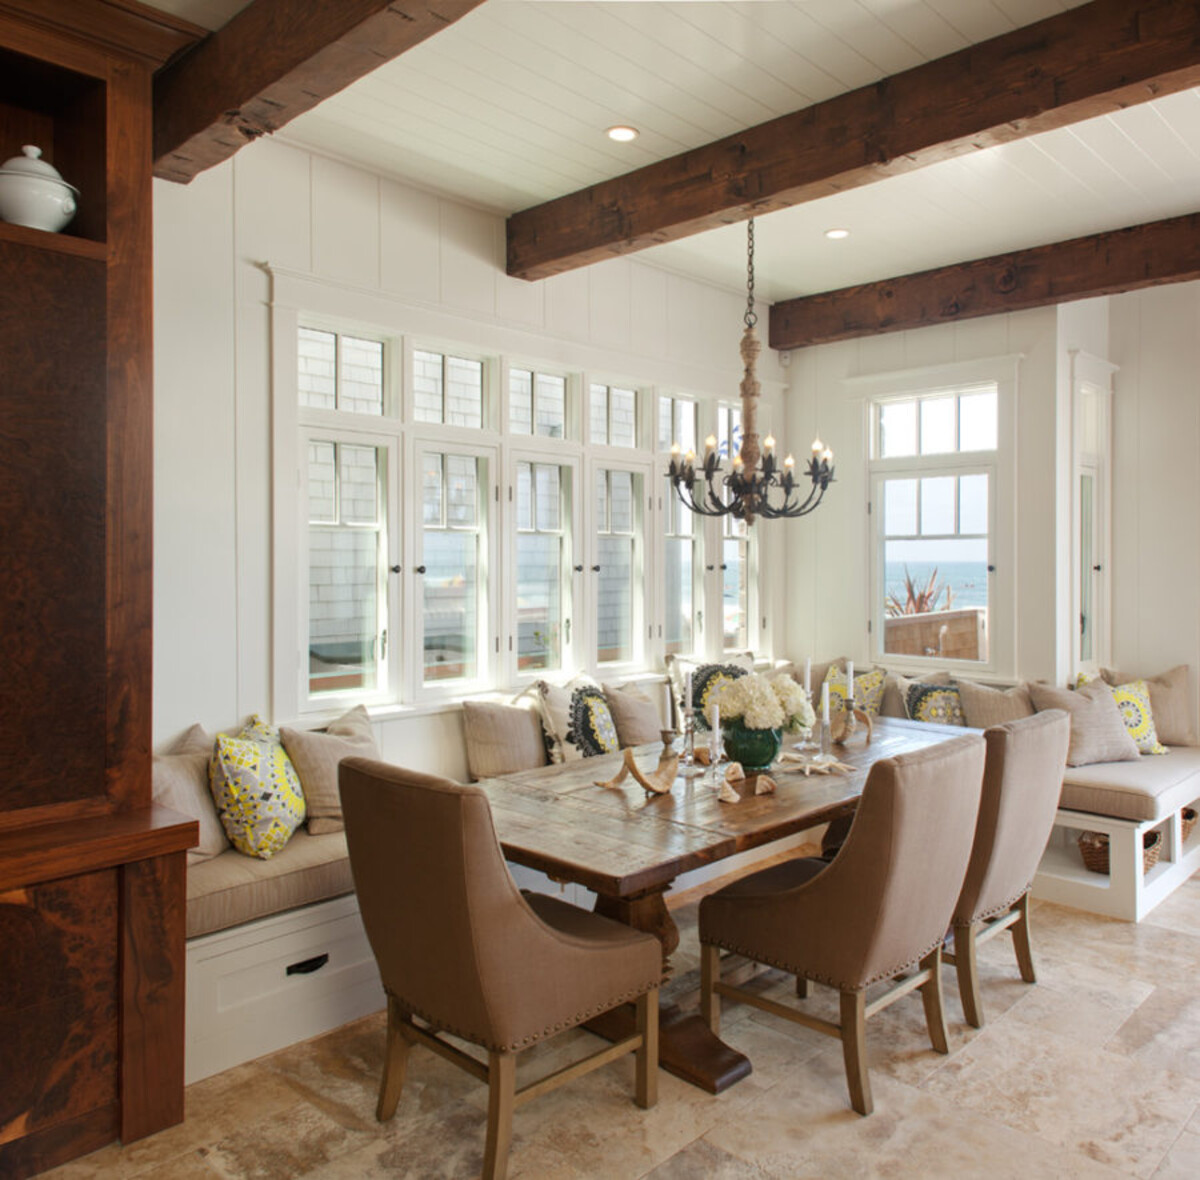 Banquette Seating Ideas: For A Stylish & Comfy Kitchen Diner